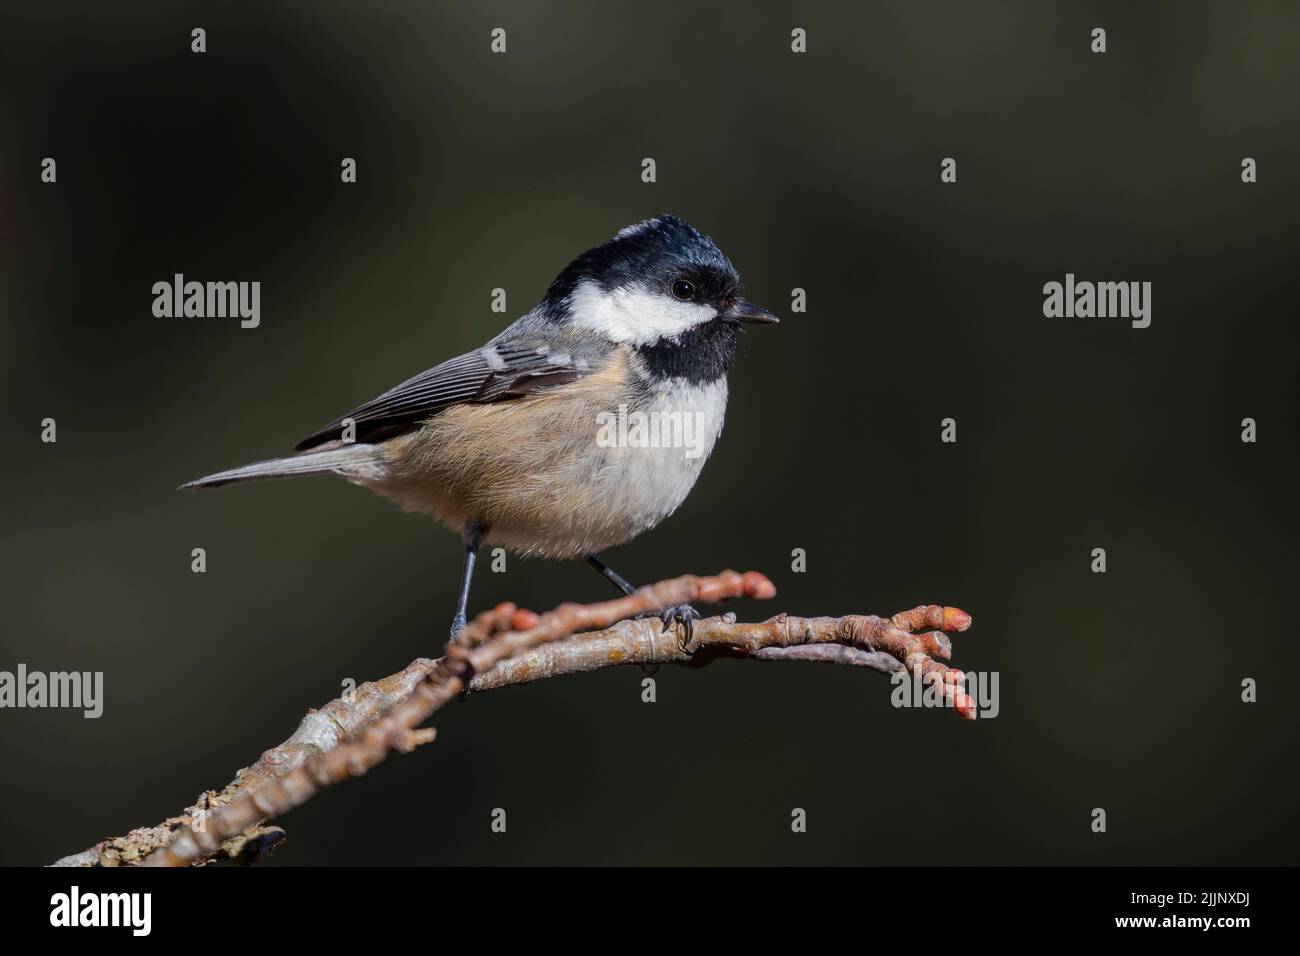 Selective focus of a Coal tit (Periparus ater) perched on a branch against an out of focus background. Stock Photo